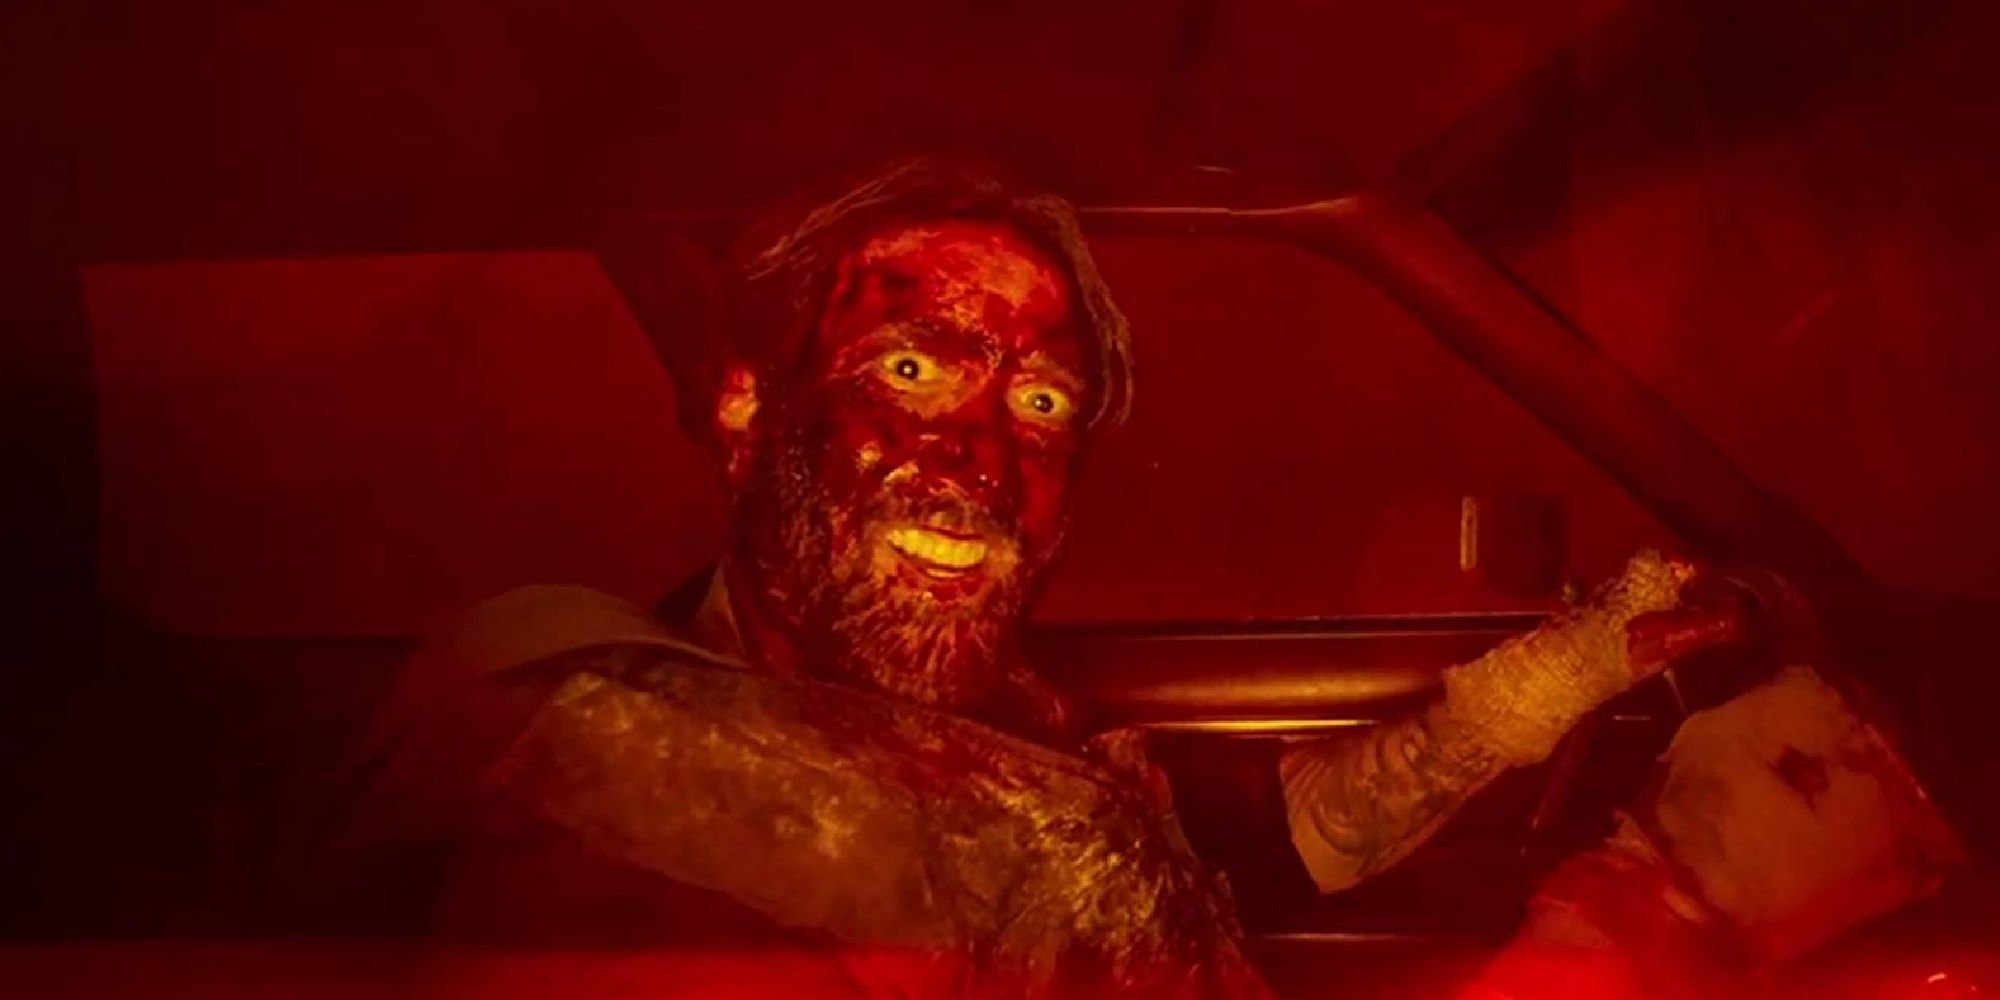 Nicolas Cage as Red sitting behind the wheel of a car smiling and covered in blood in 'Mandy'